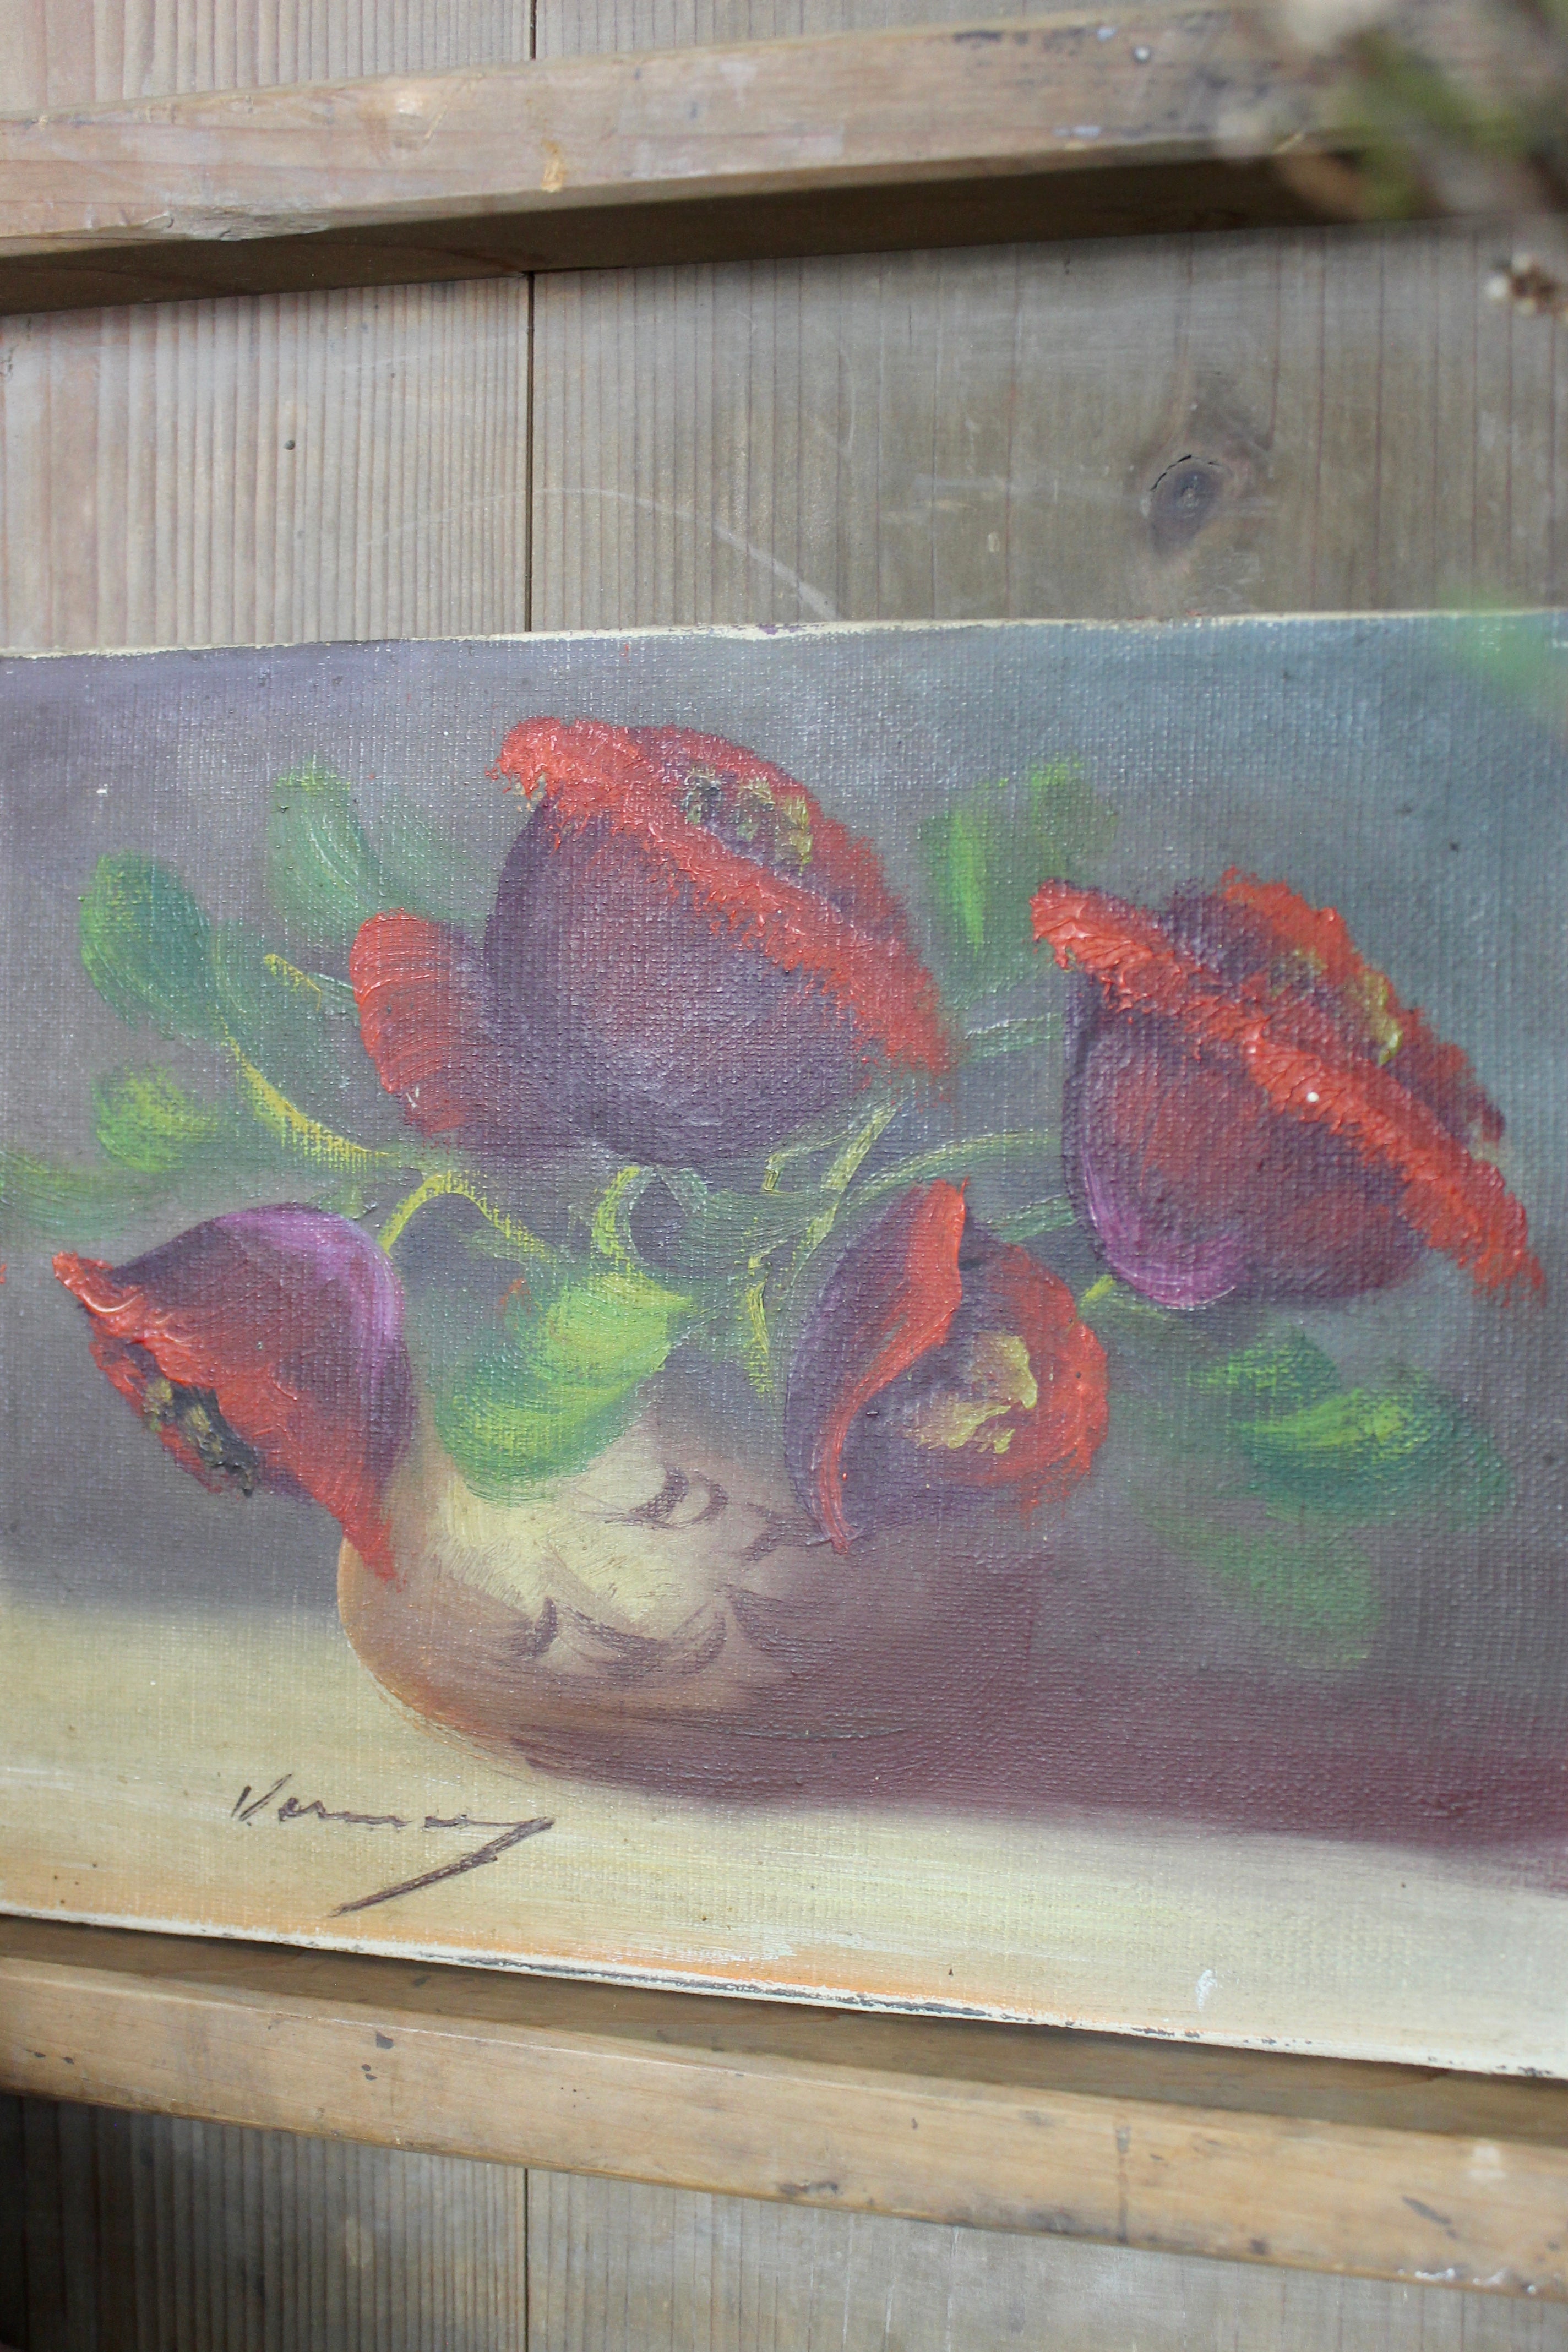 Vintage French Floral Painting